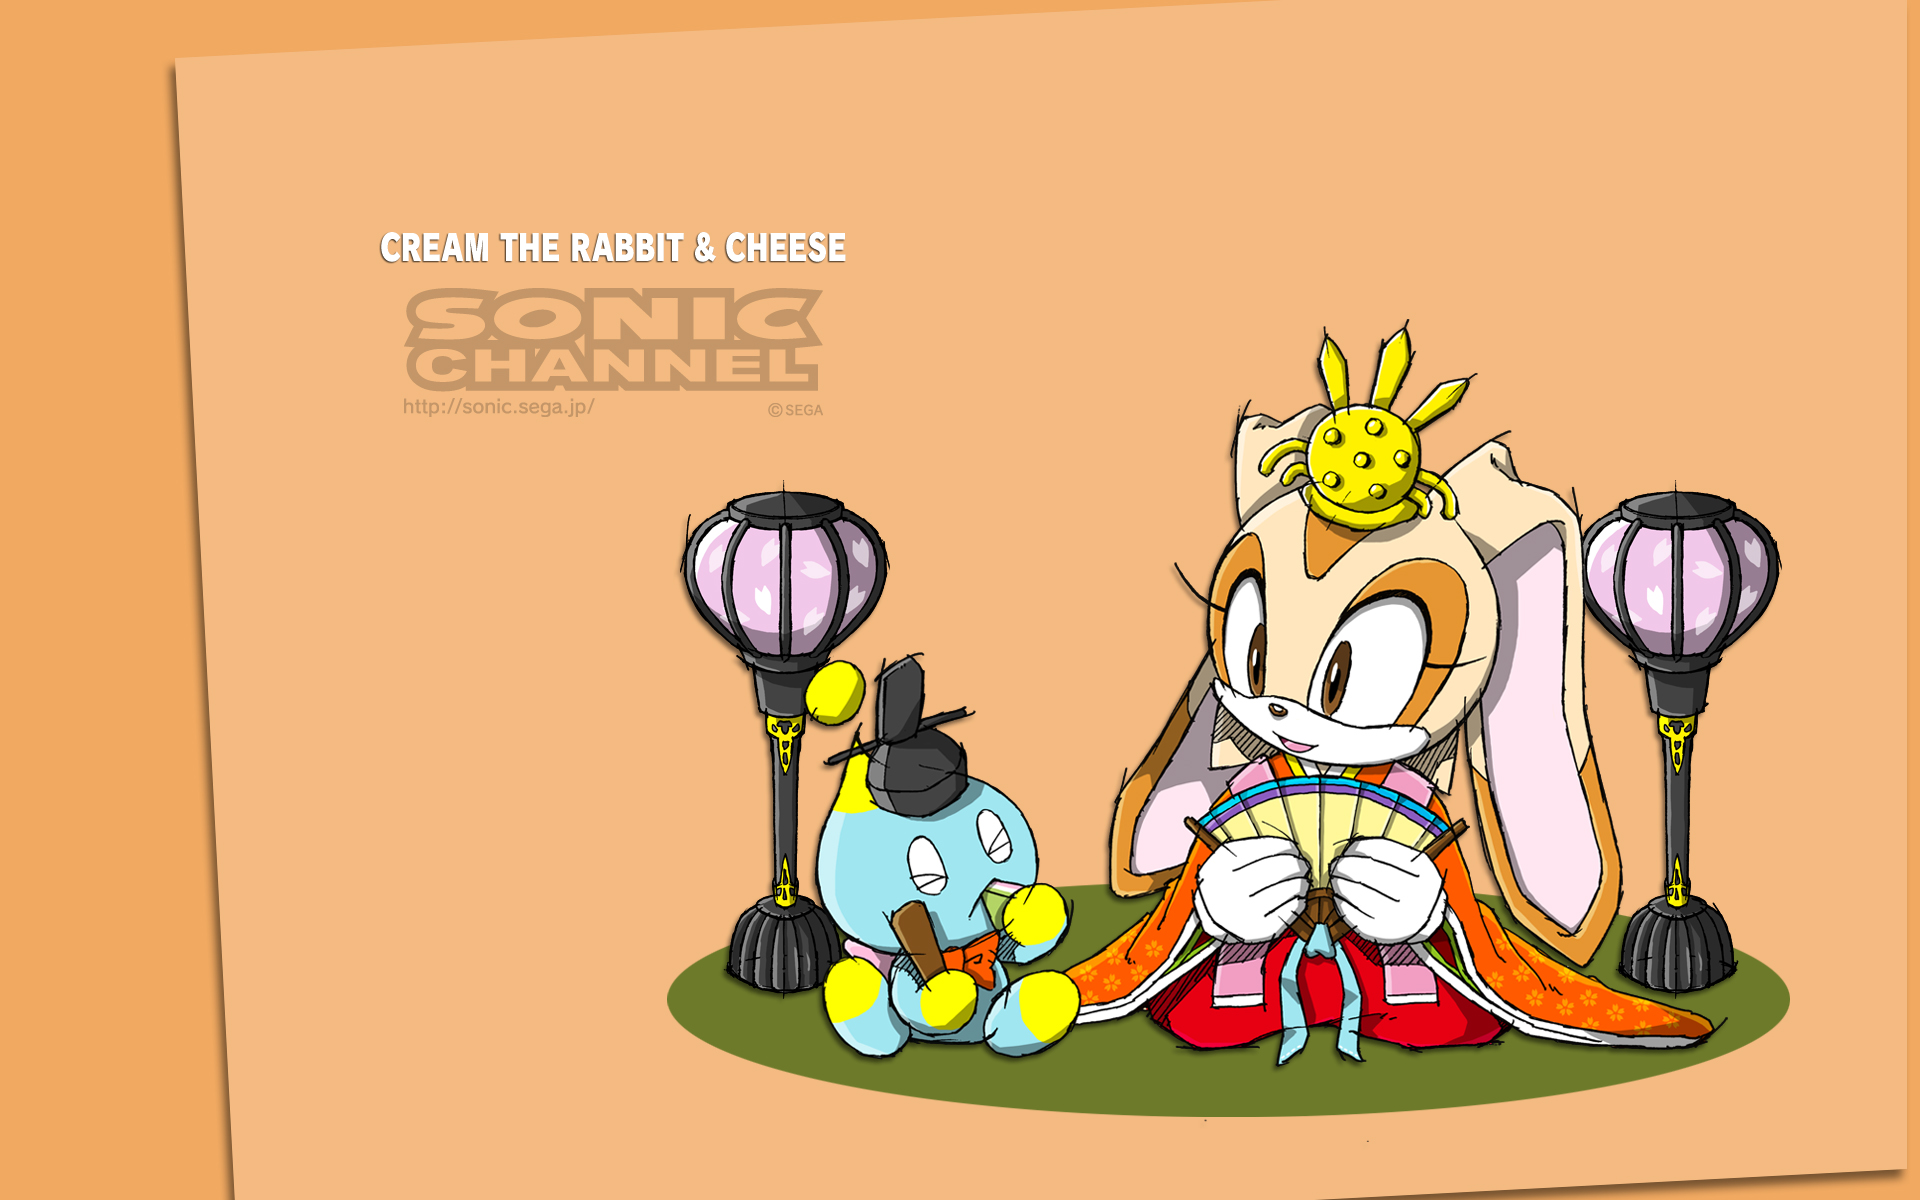 201303 Cream The Rabbit And Cheese Sonic Channel Gallery Sonic Scanf